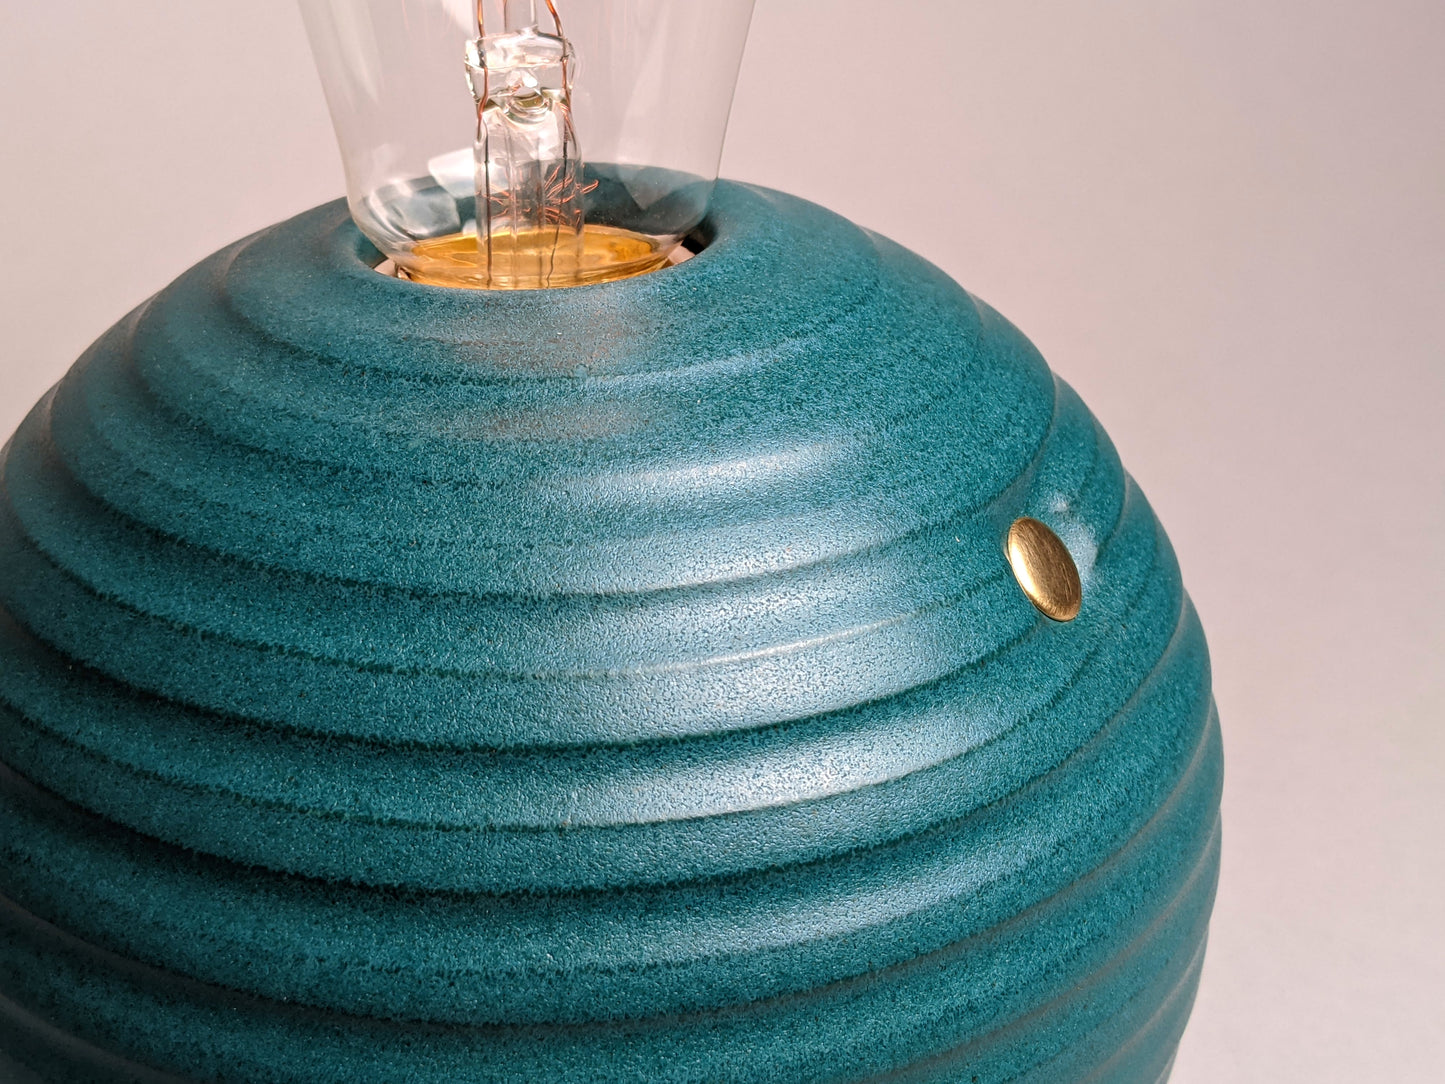 handcrafted smooth stoneware touch lamp in satin green glaze.